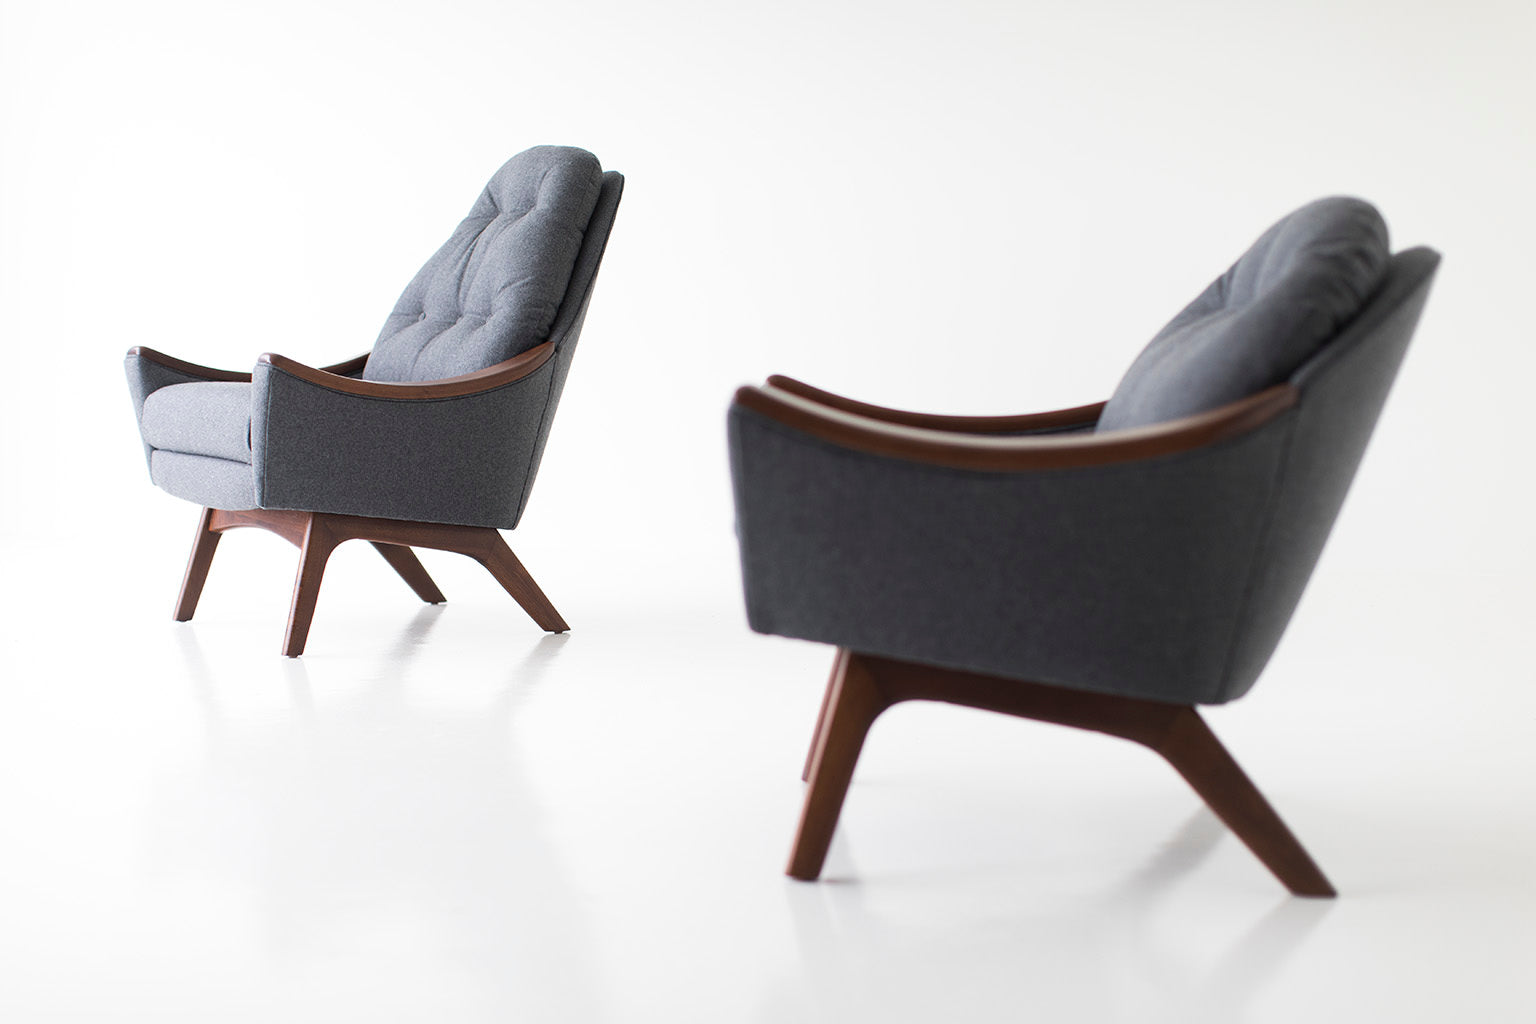 Adrian Pearsall Lounge Chairs for Craft Associates Inc. - 01091803